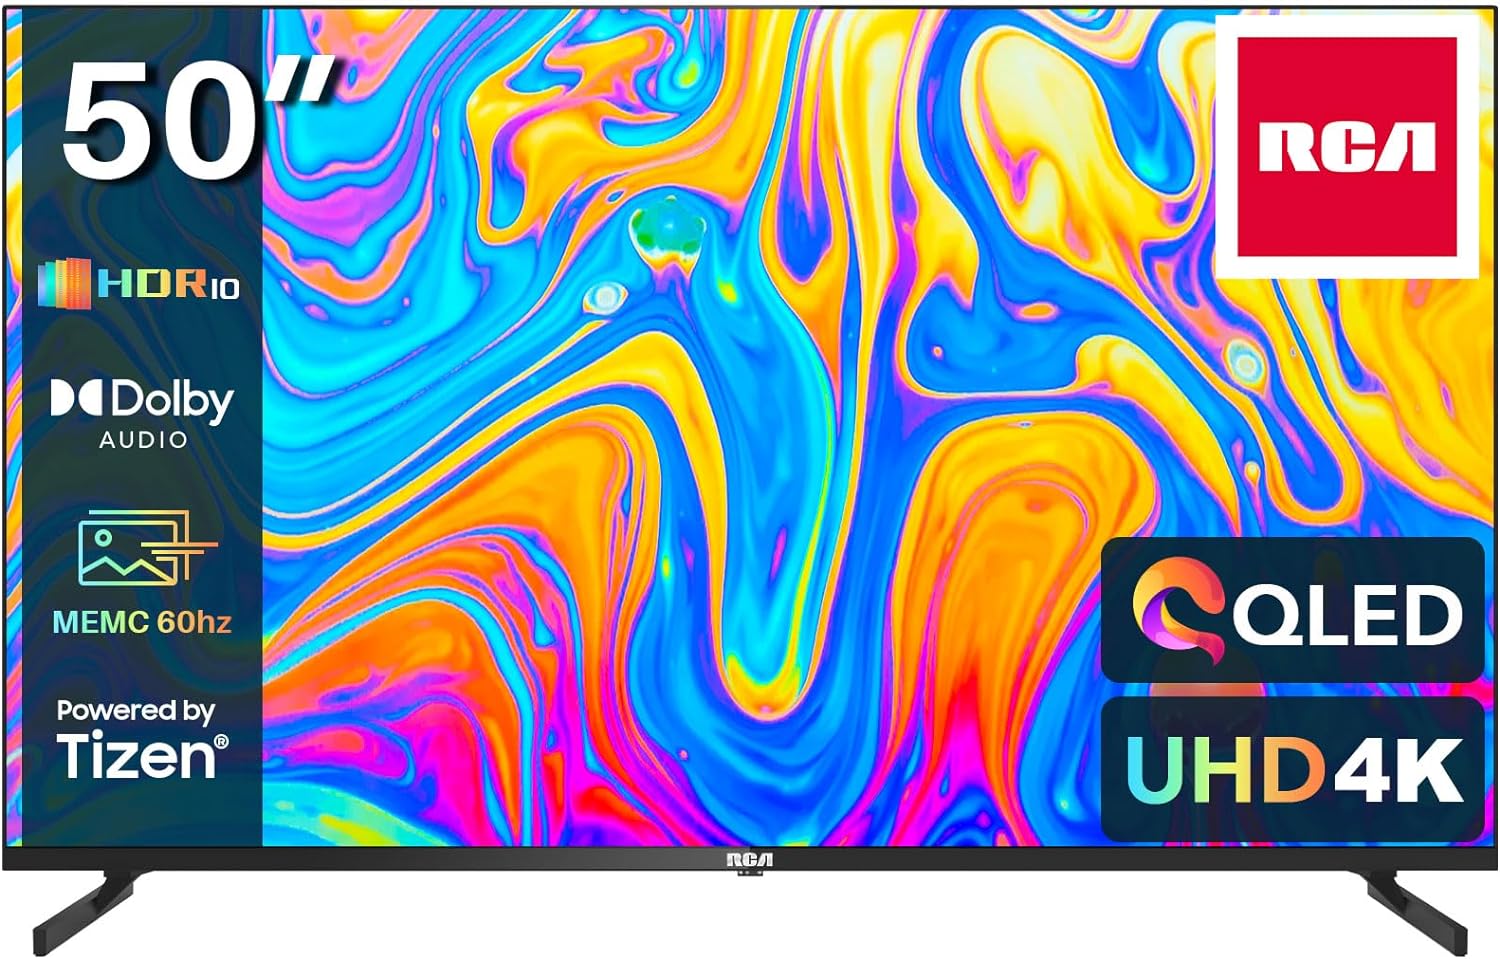 RCA 55 Inch QLED UHD Smart TV, 4K HDR10 Tizen OS with Samsung TV Plus Youtube Netflix Motion Mode, 3 x HDMI 2 x USB WiFi Bluetooth, Large Screen for Living Room Home Office - Amazing Gadgets Outlet